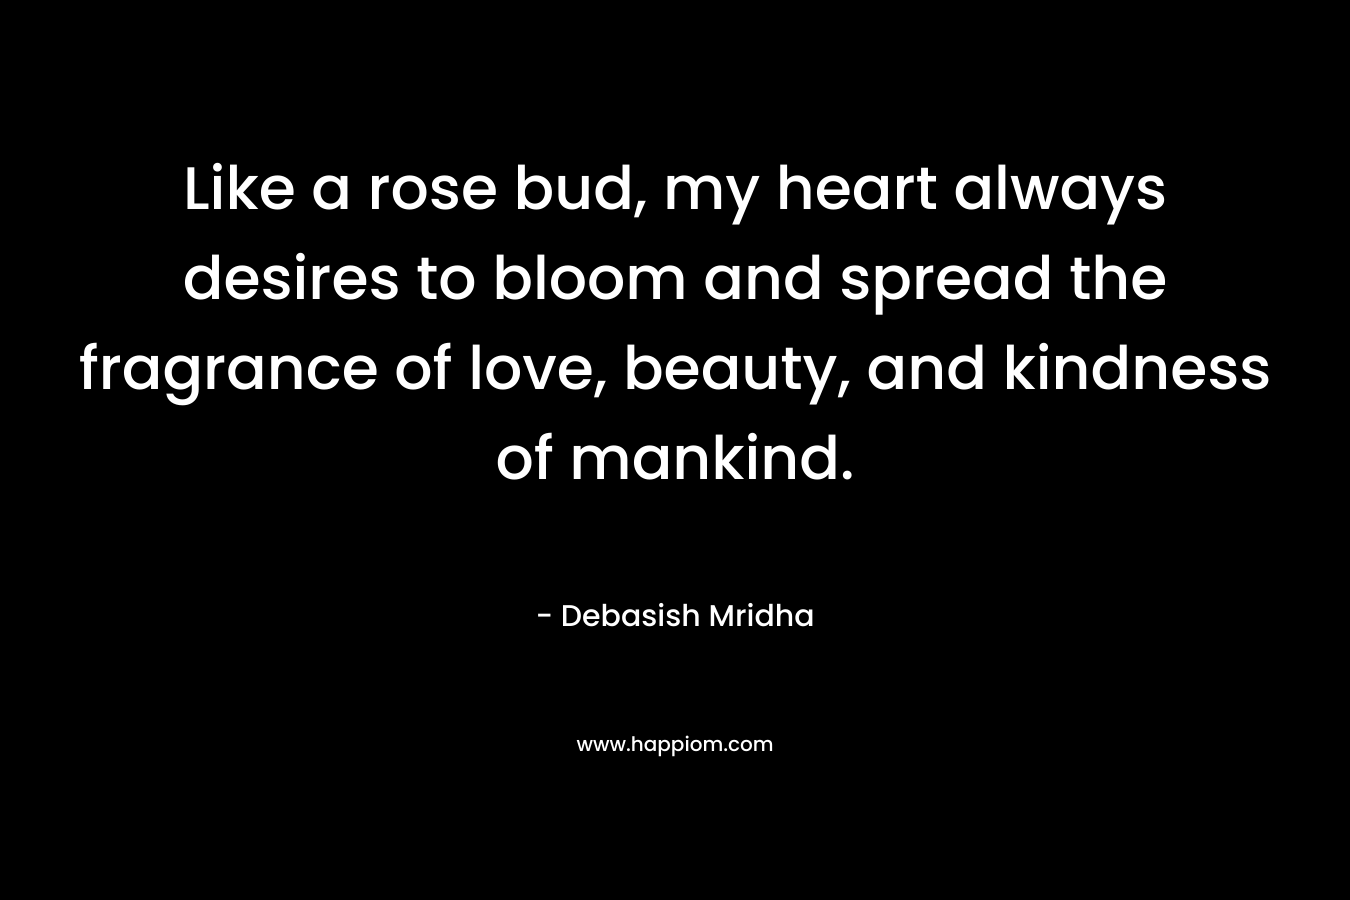 Like a rose bud, my heart always desires to bloom and spread the fragrance of love, beauty, and kindness of mankind.